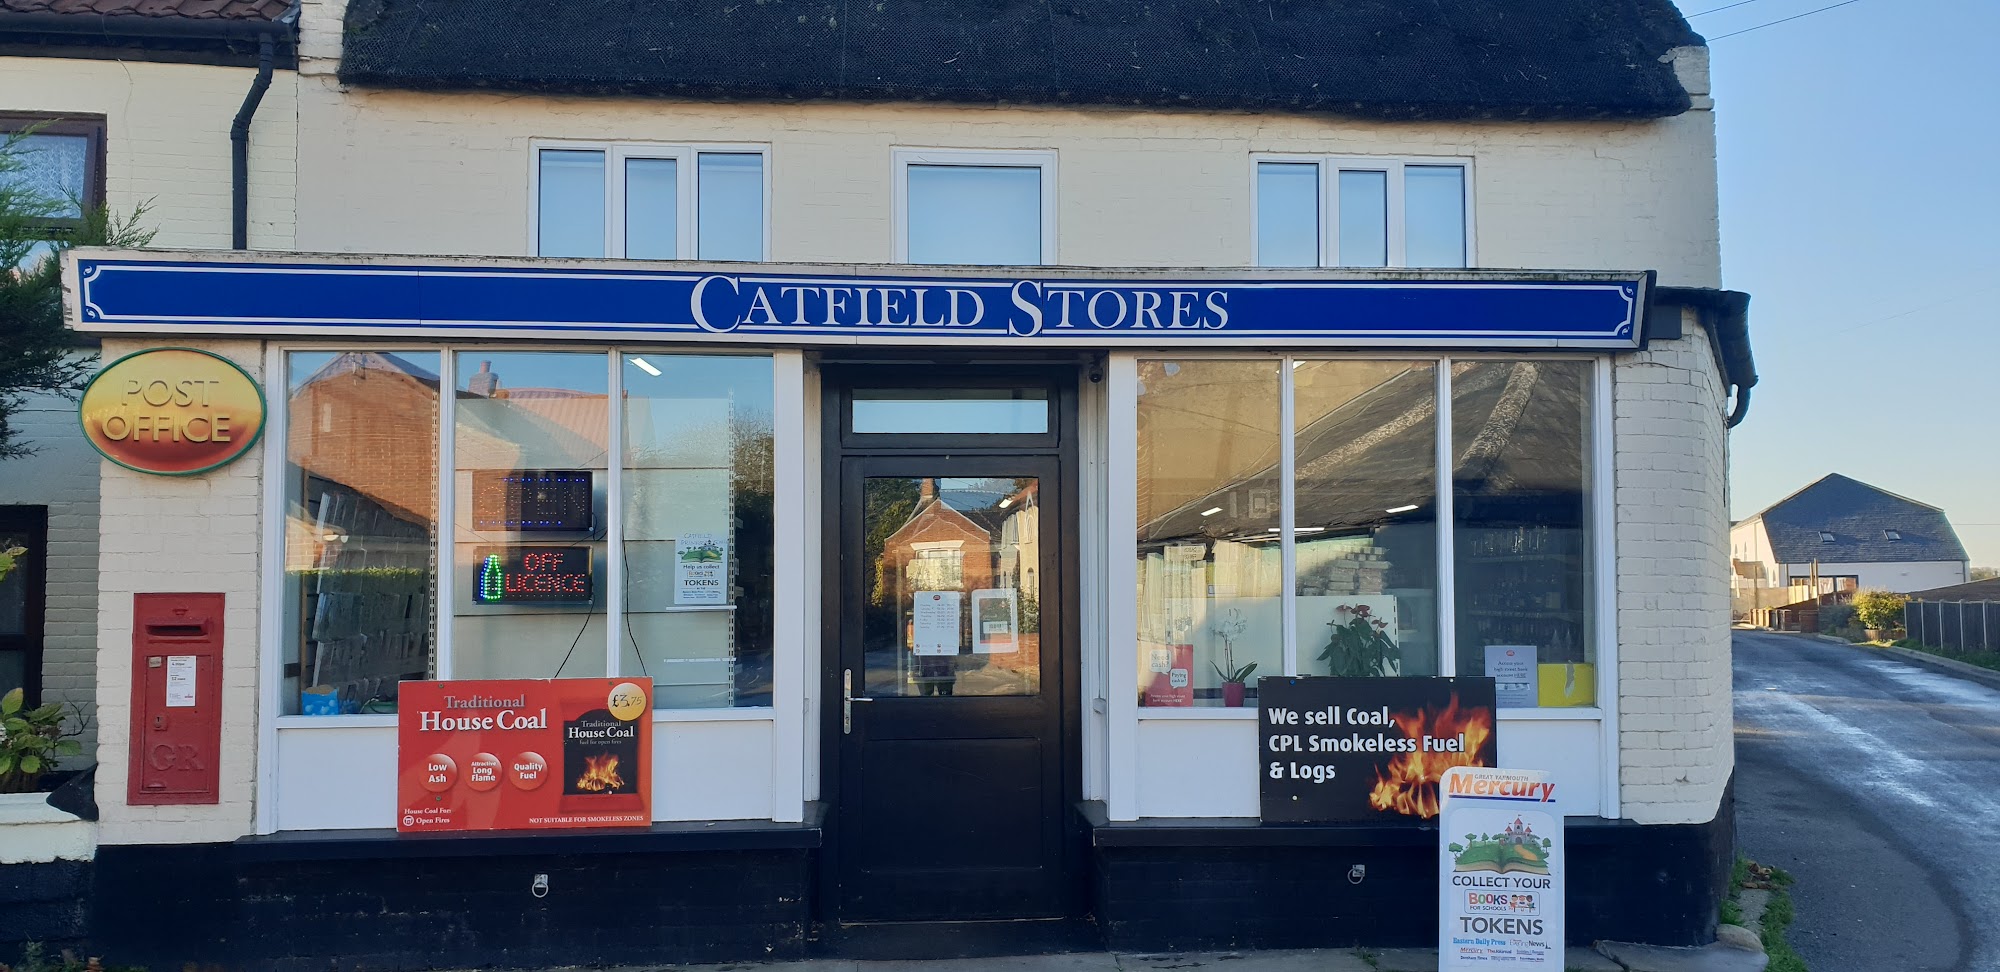 Catfield Stores & Post Office